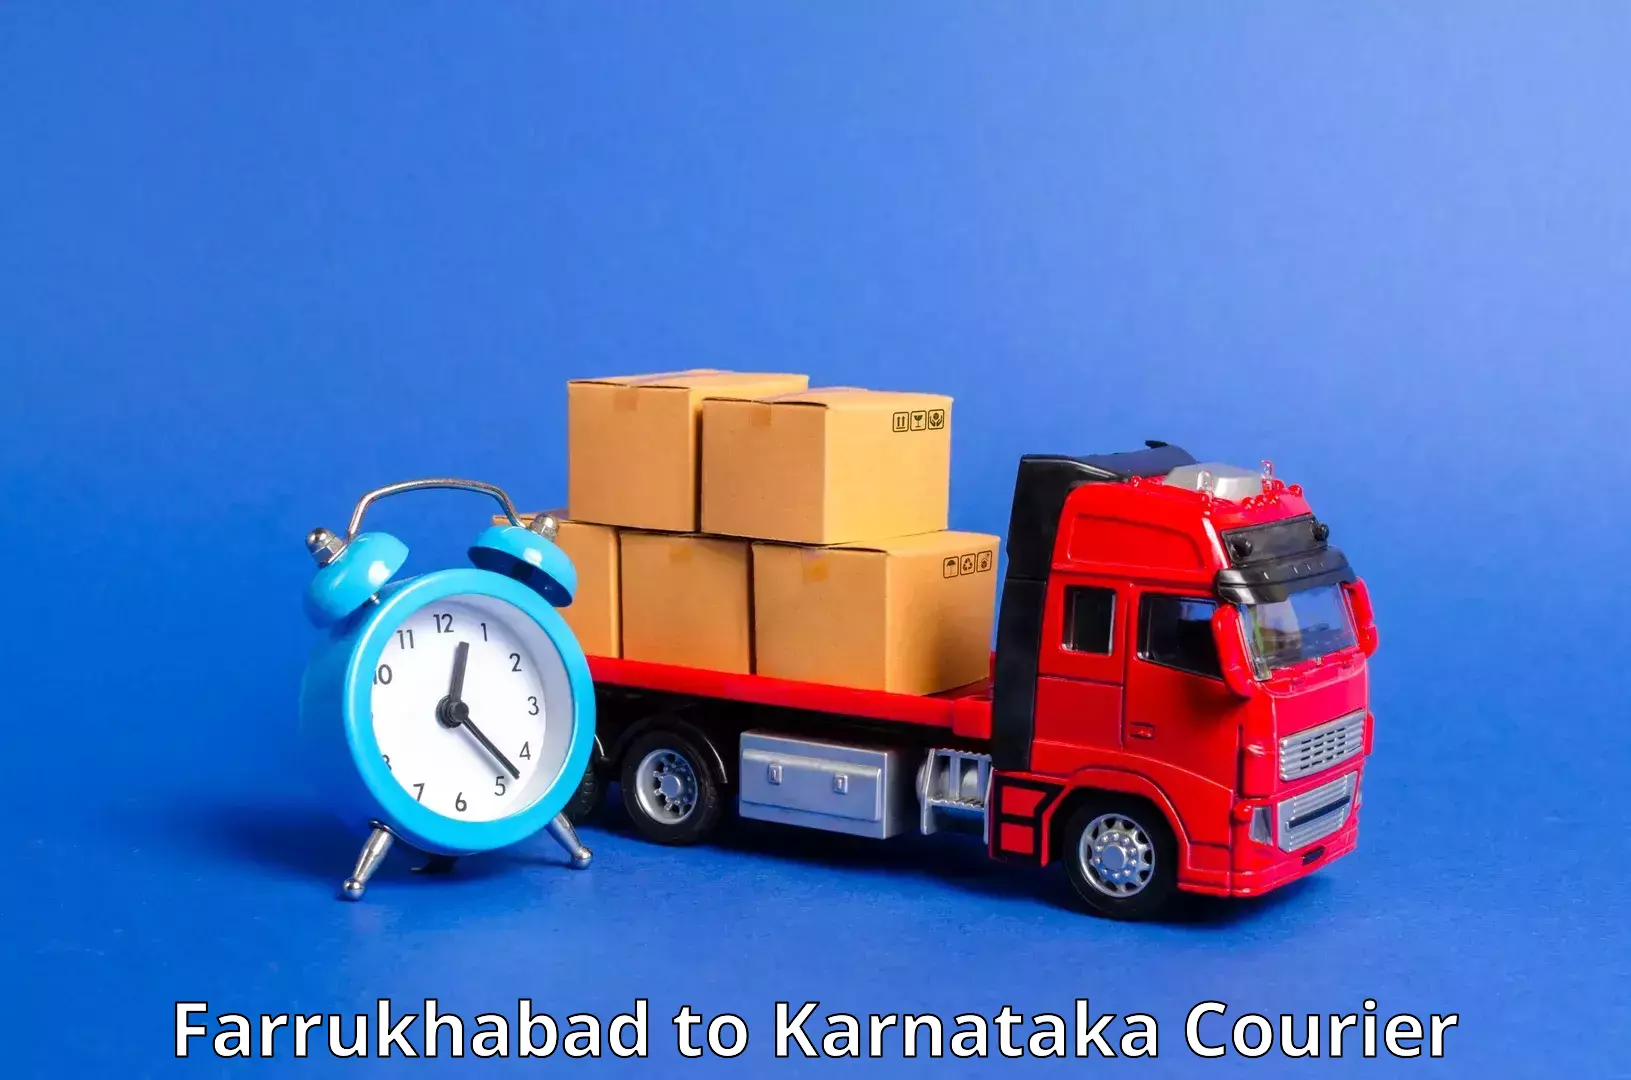 Courier service innovation Farrukhabad to Mangalore